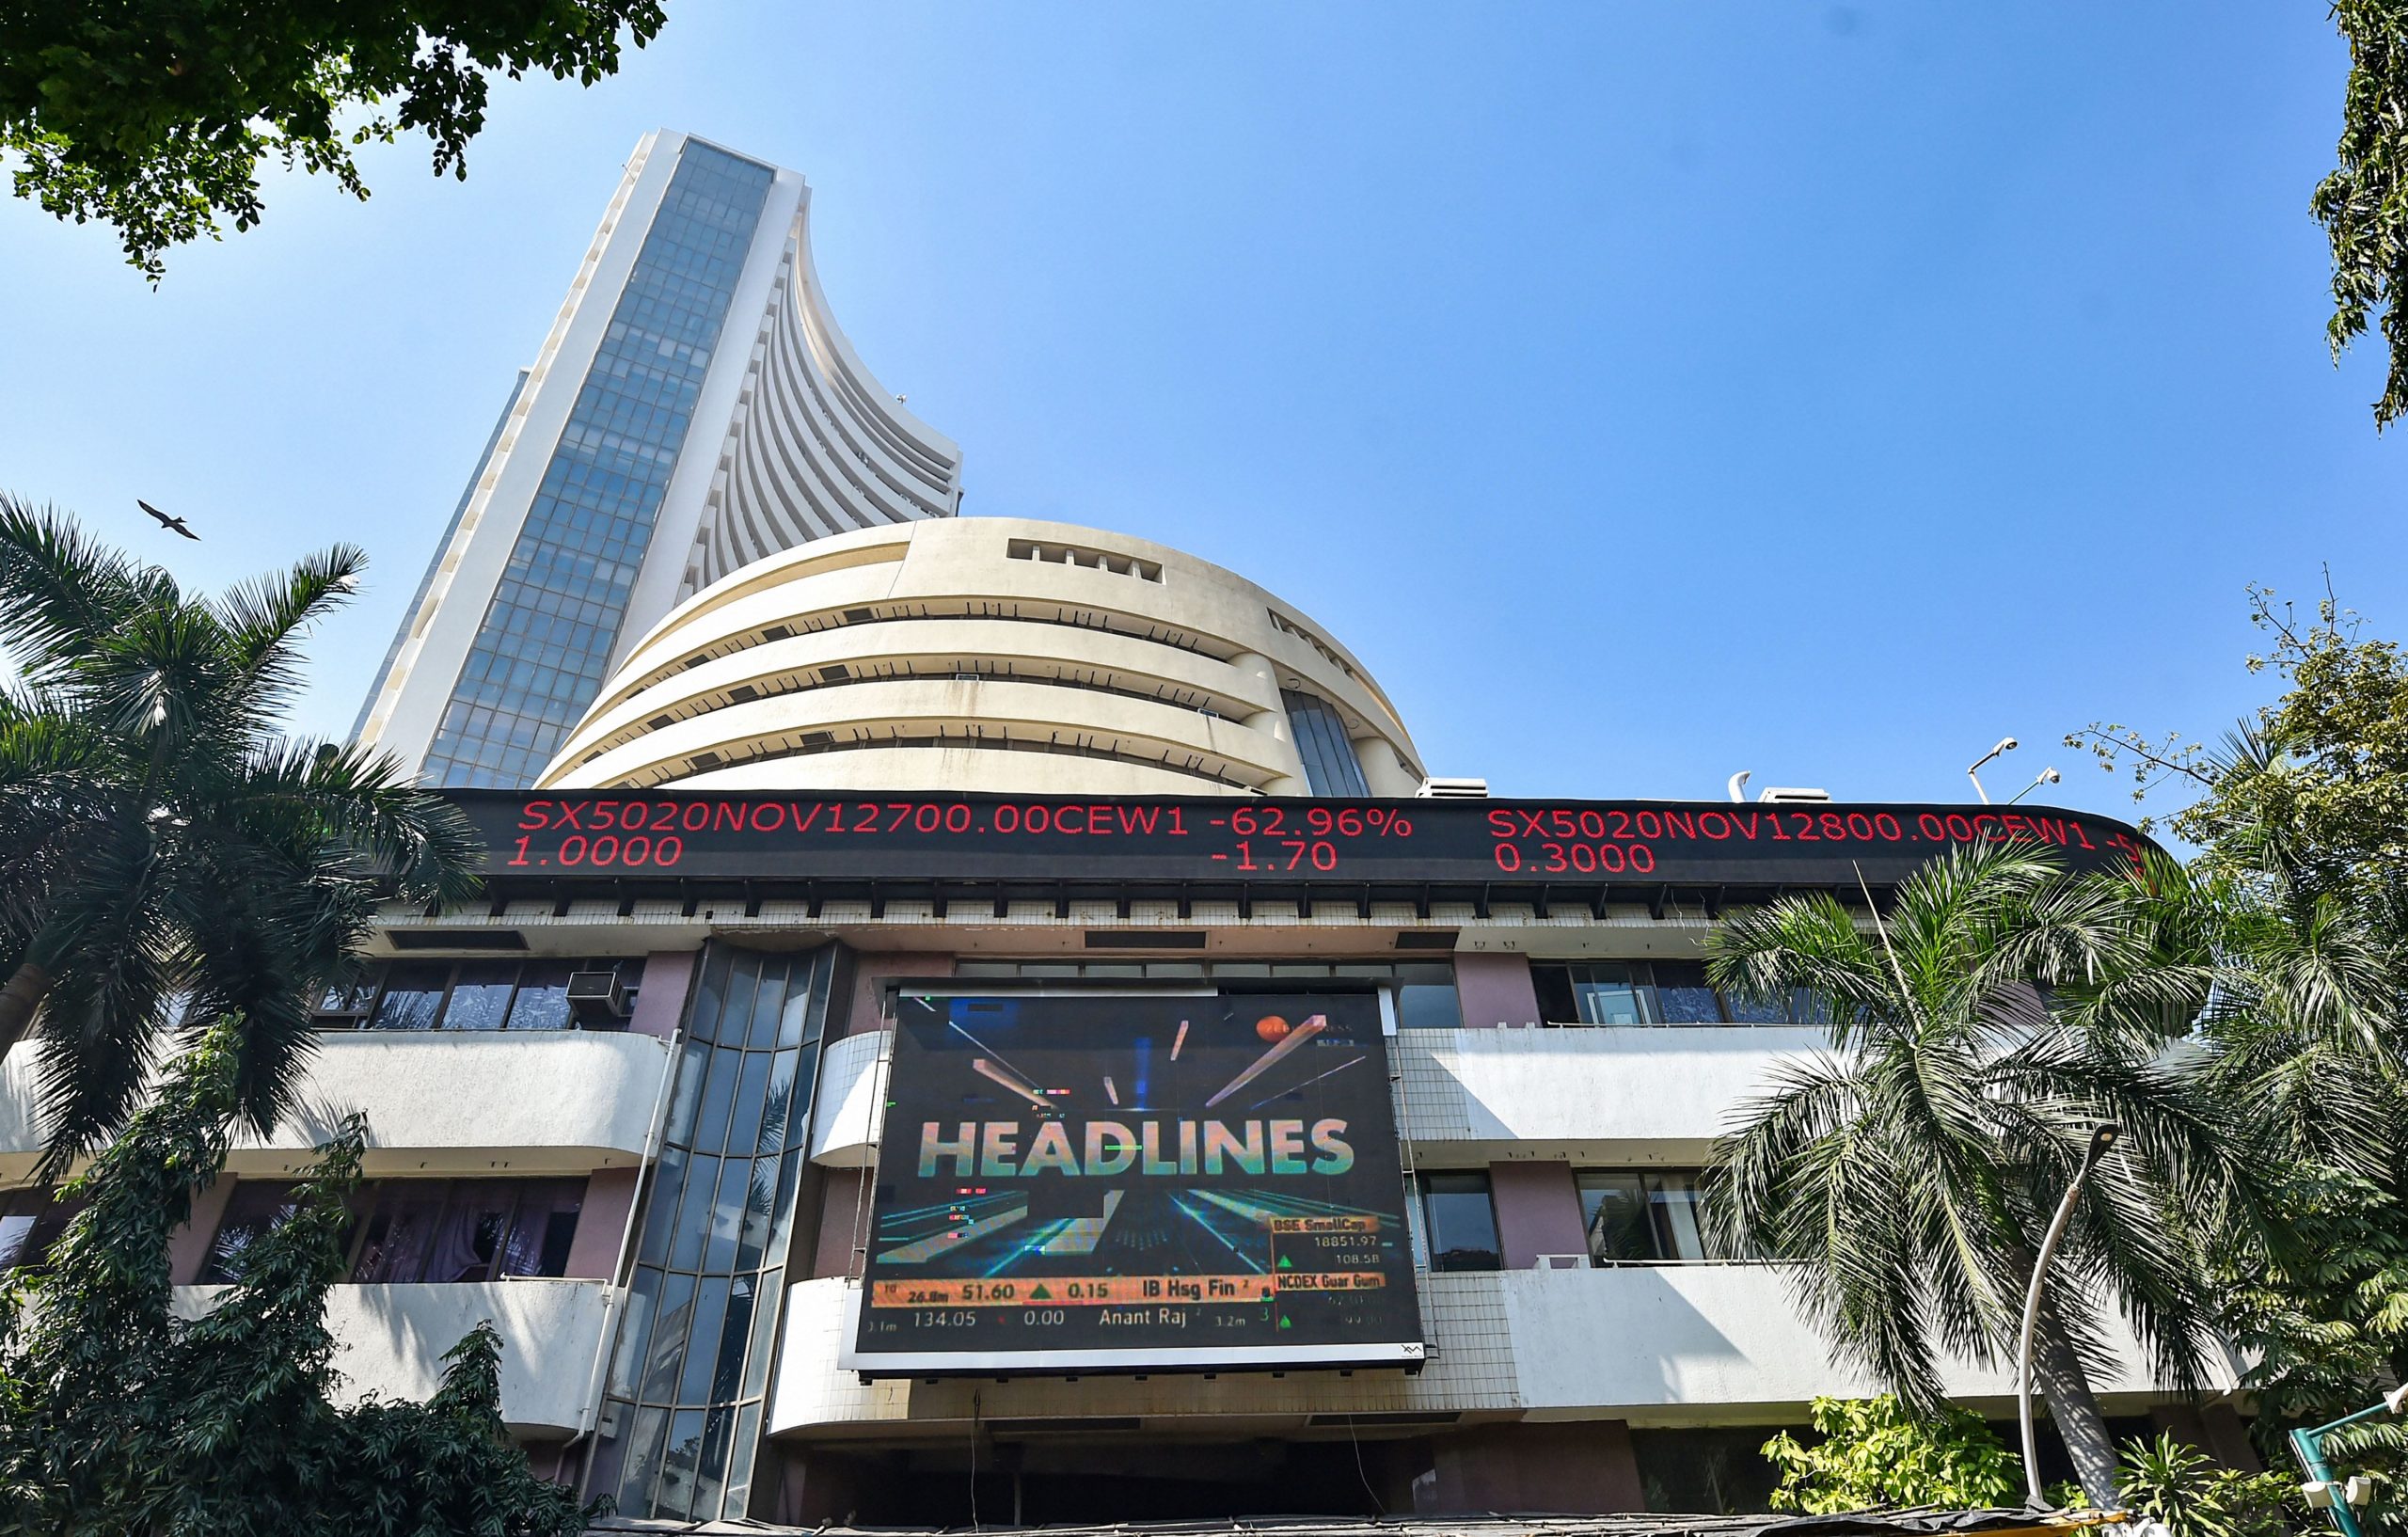 Trending Stocks: AU Small Finance, Jindal, GAIL, HUL, Dr Reddy and others in news today